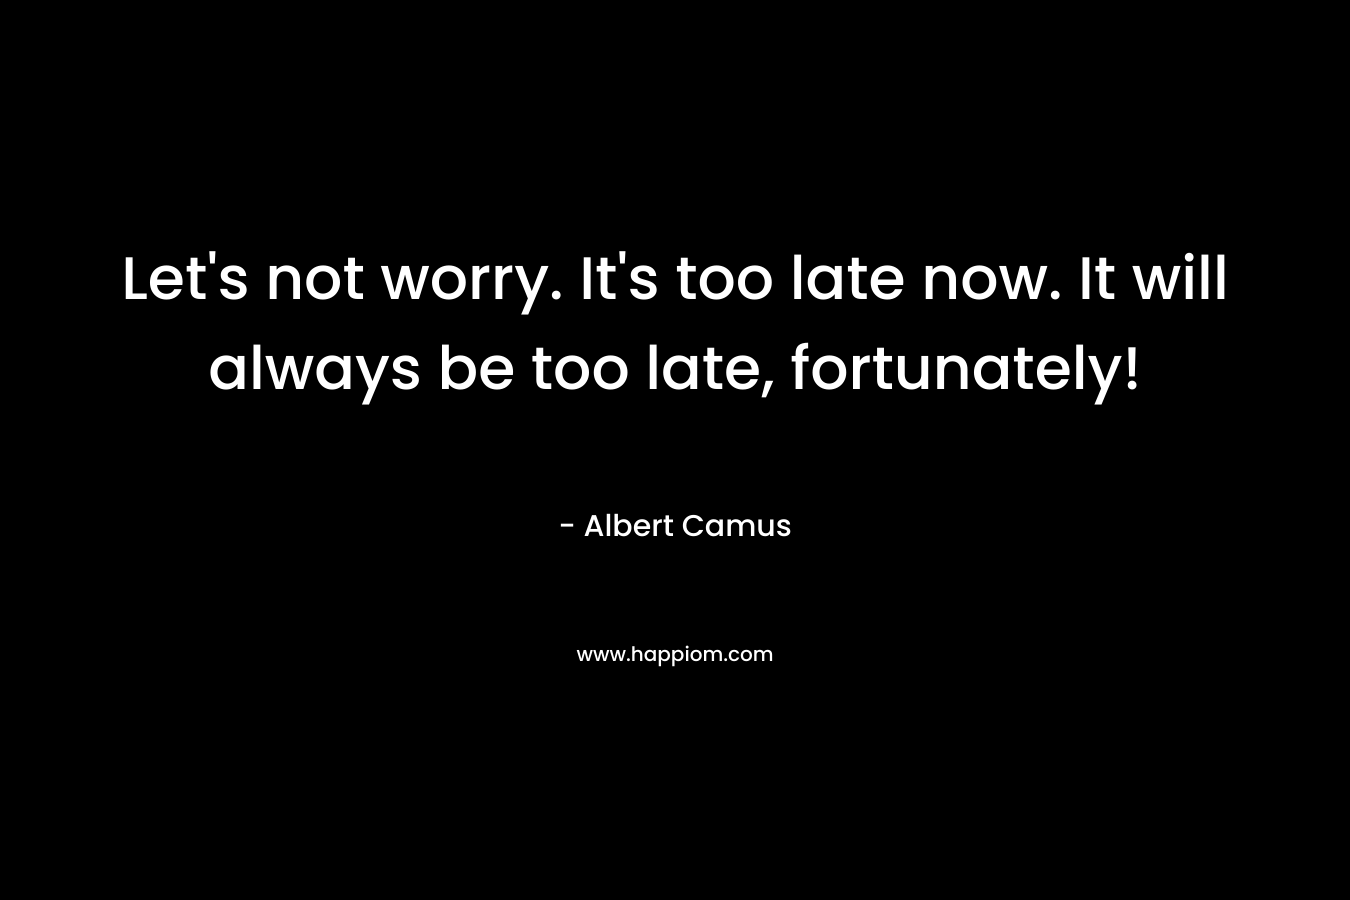 Let's not worry. It's too late now. It will always be too late, fortunately!